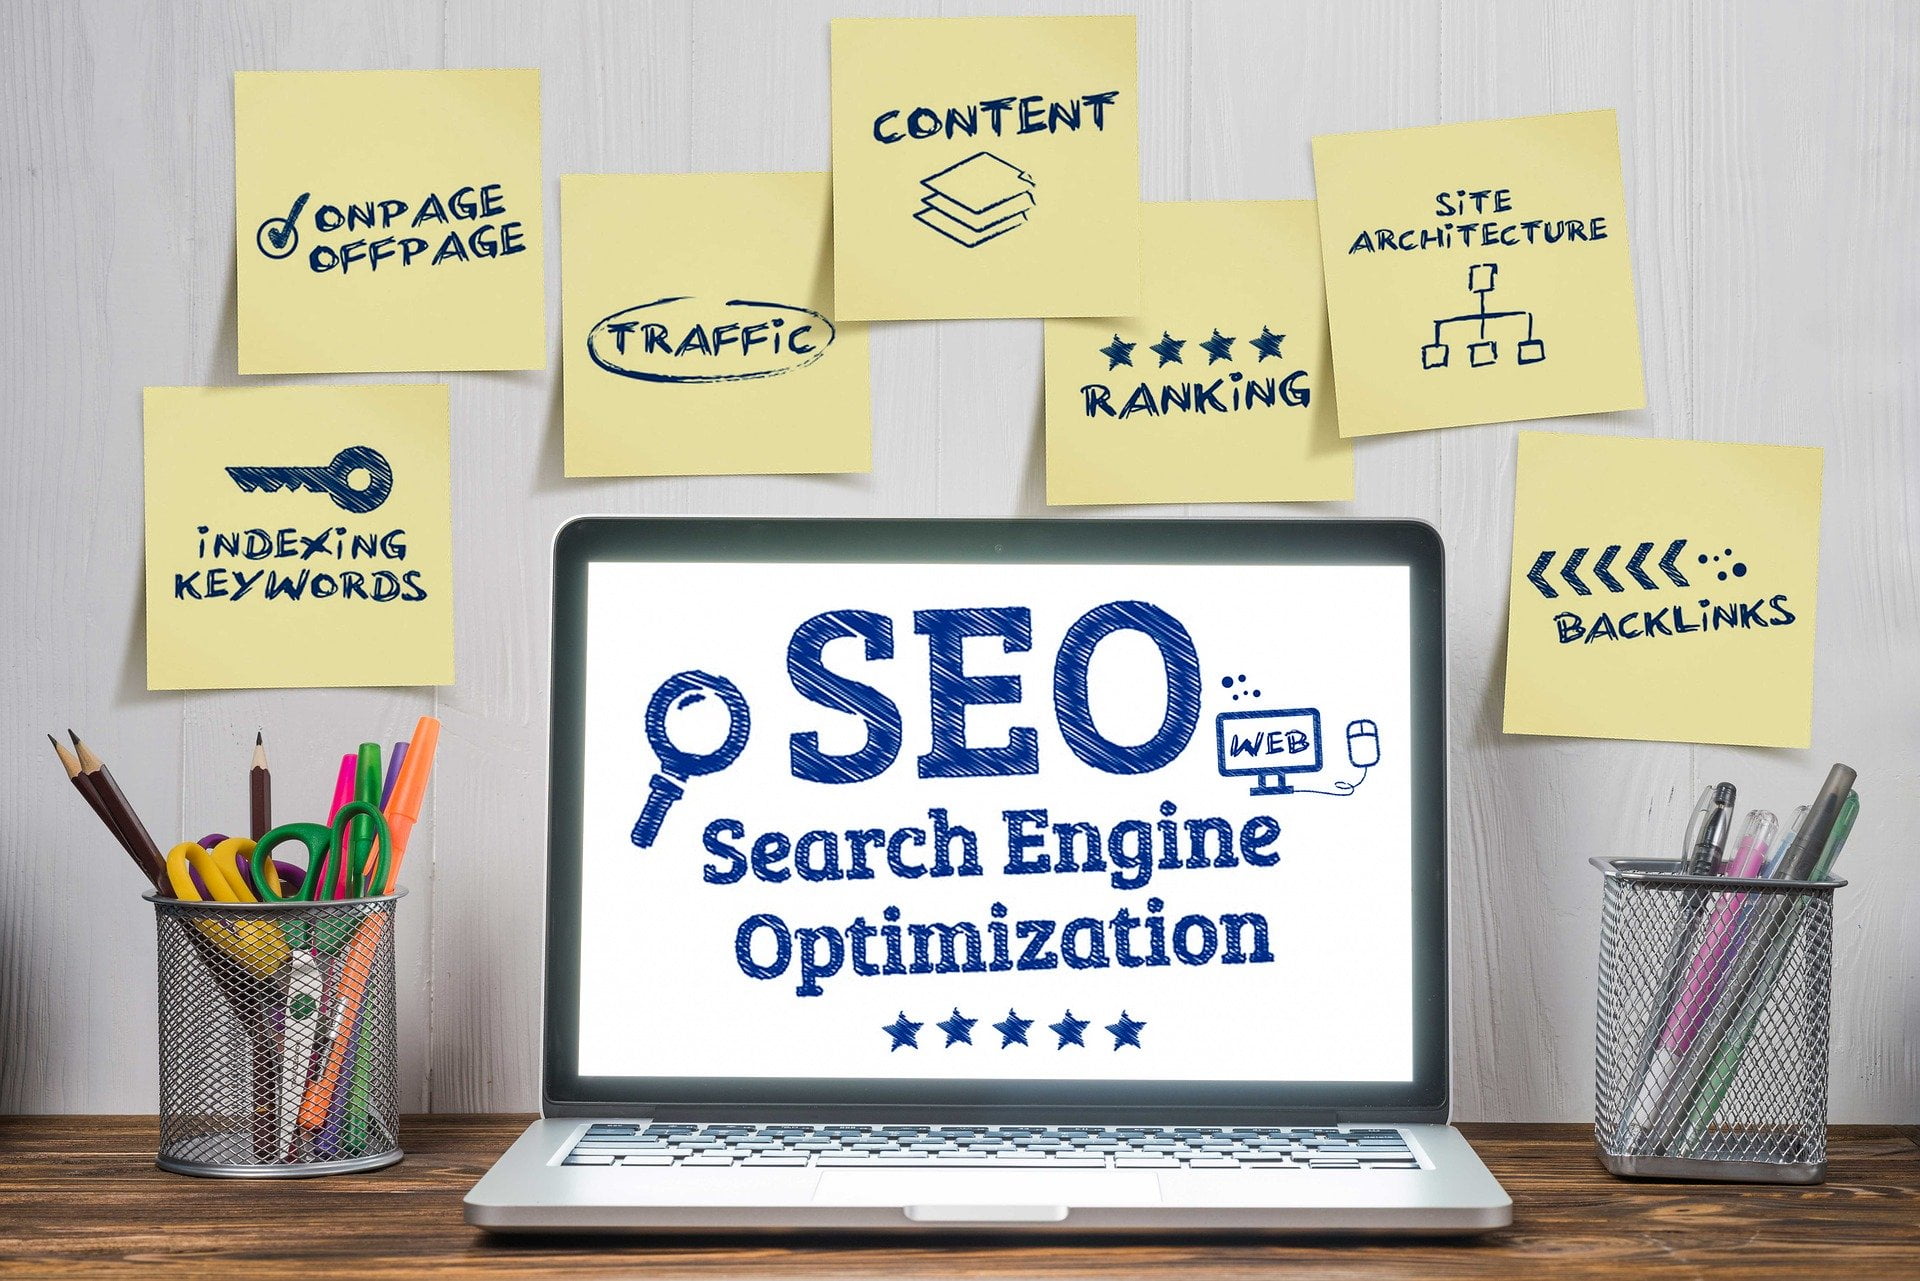 search engine optimization on computer